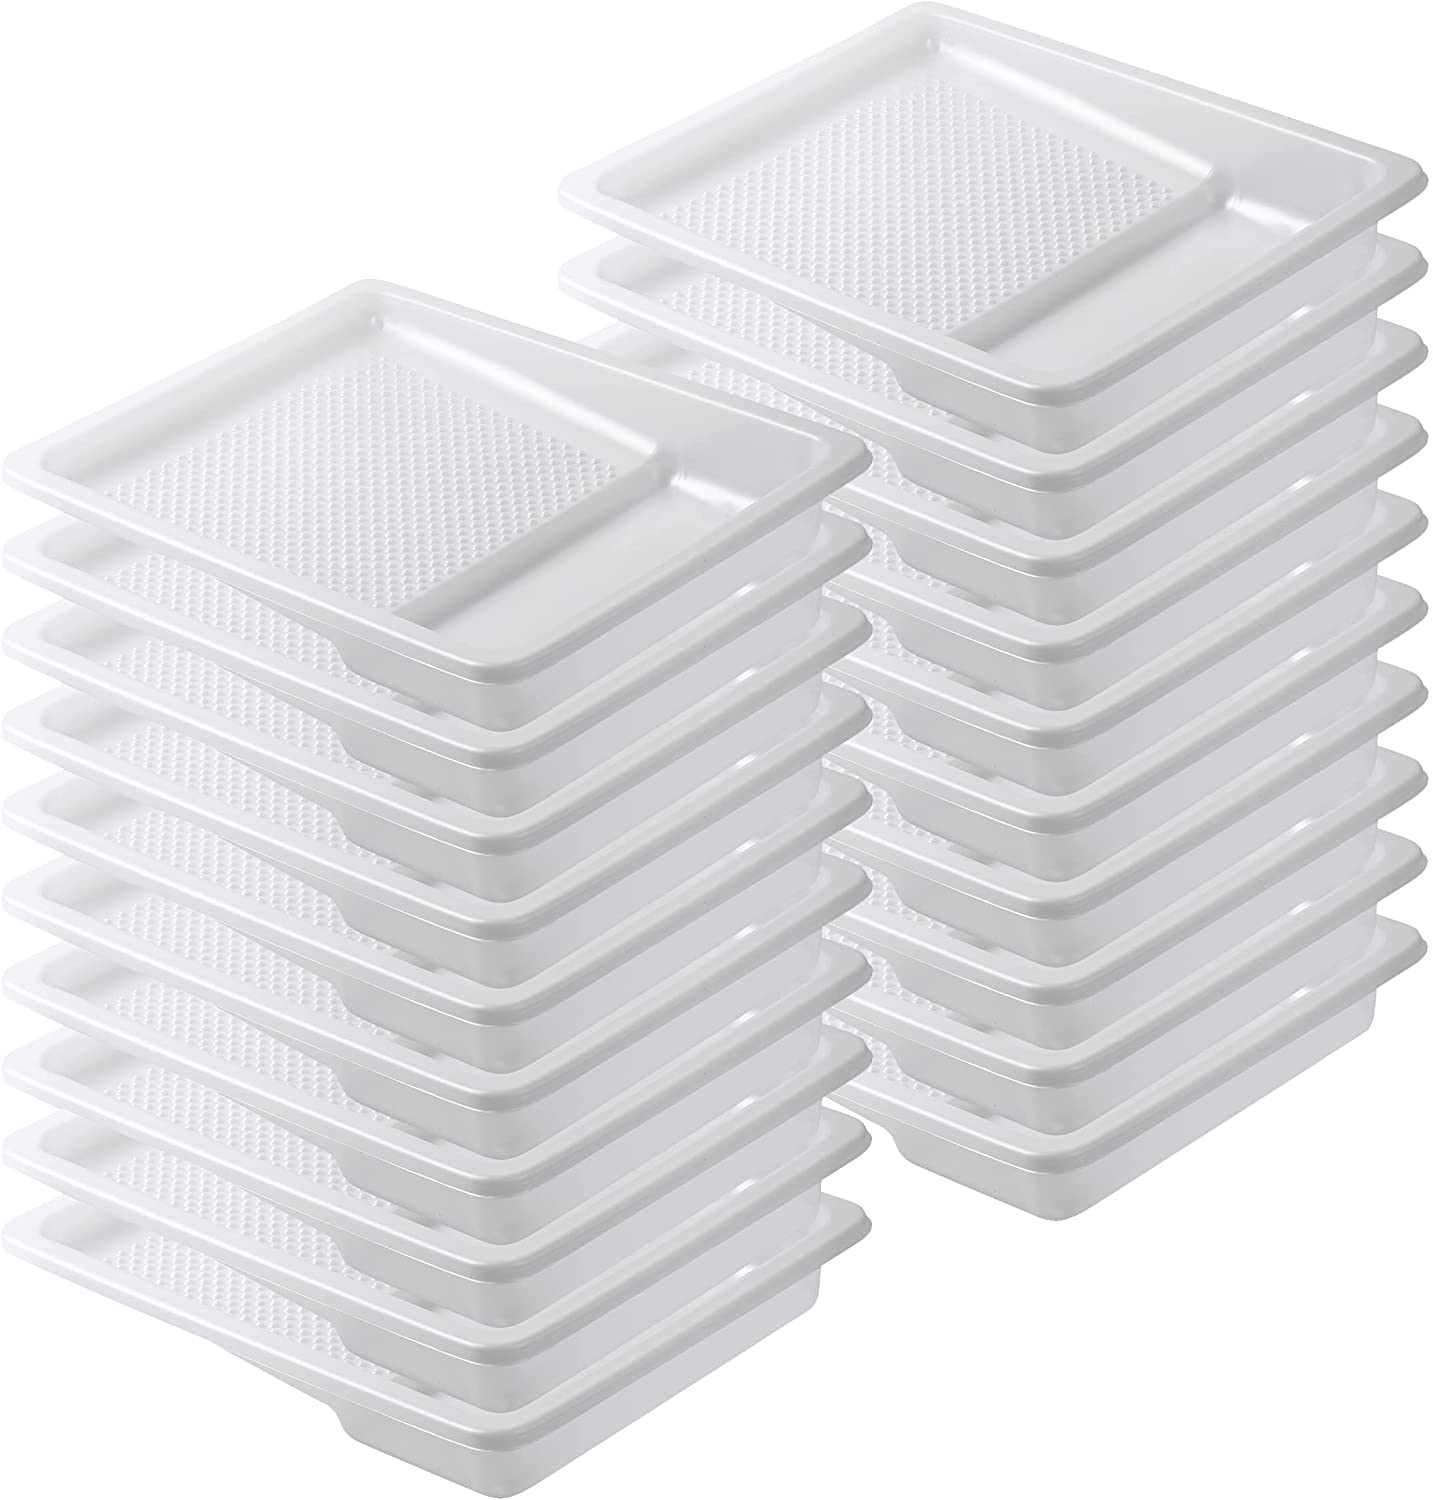 Bates Choice Bates- Paint Tray Liner, 9 inch, 20 Pack, Paint Pans Trays, Plastic Paint Tray, Disposable Paint Tray, Paint Roller Tray, Paint Trays for